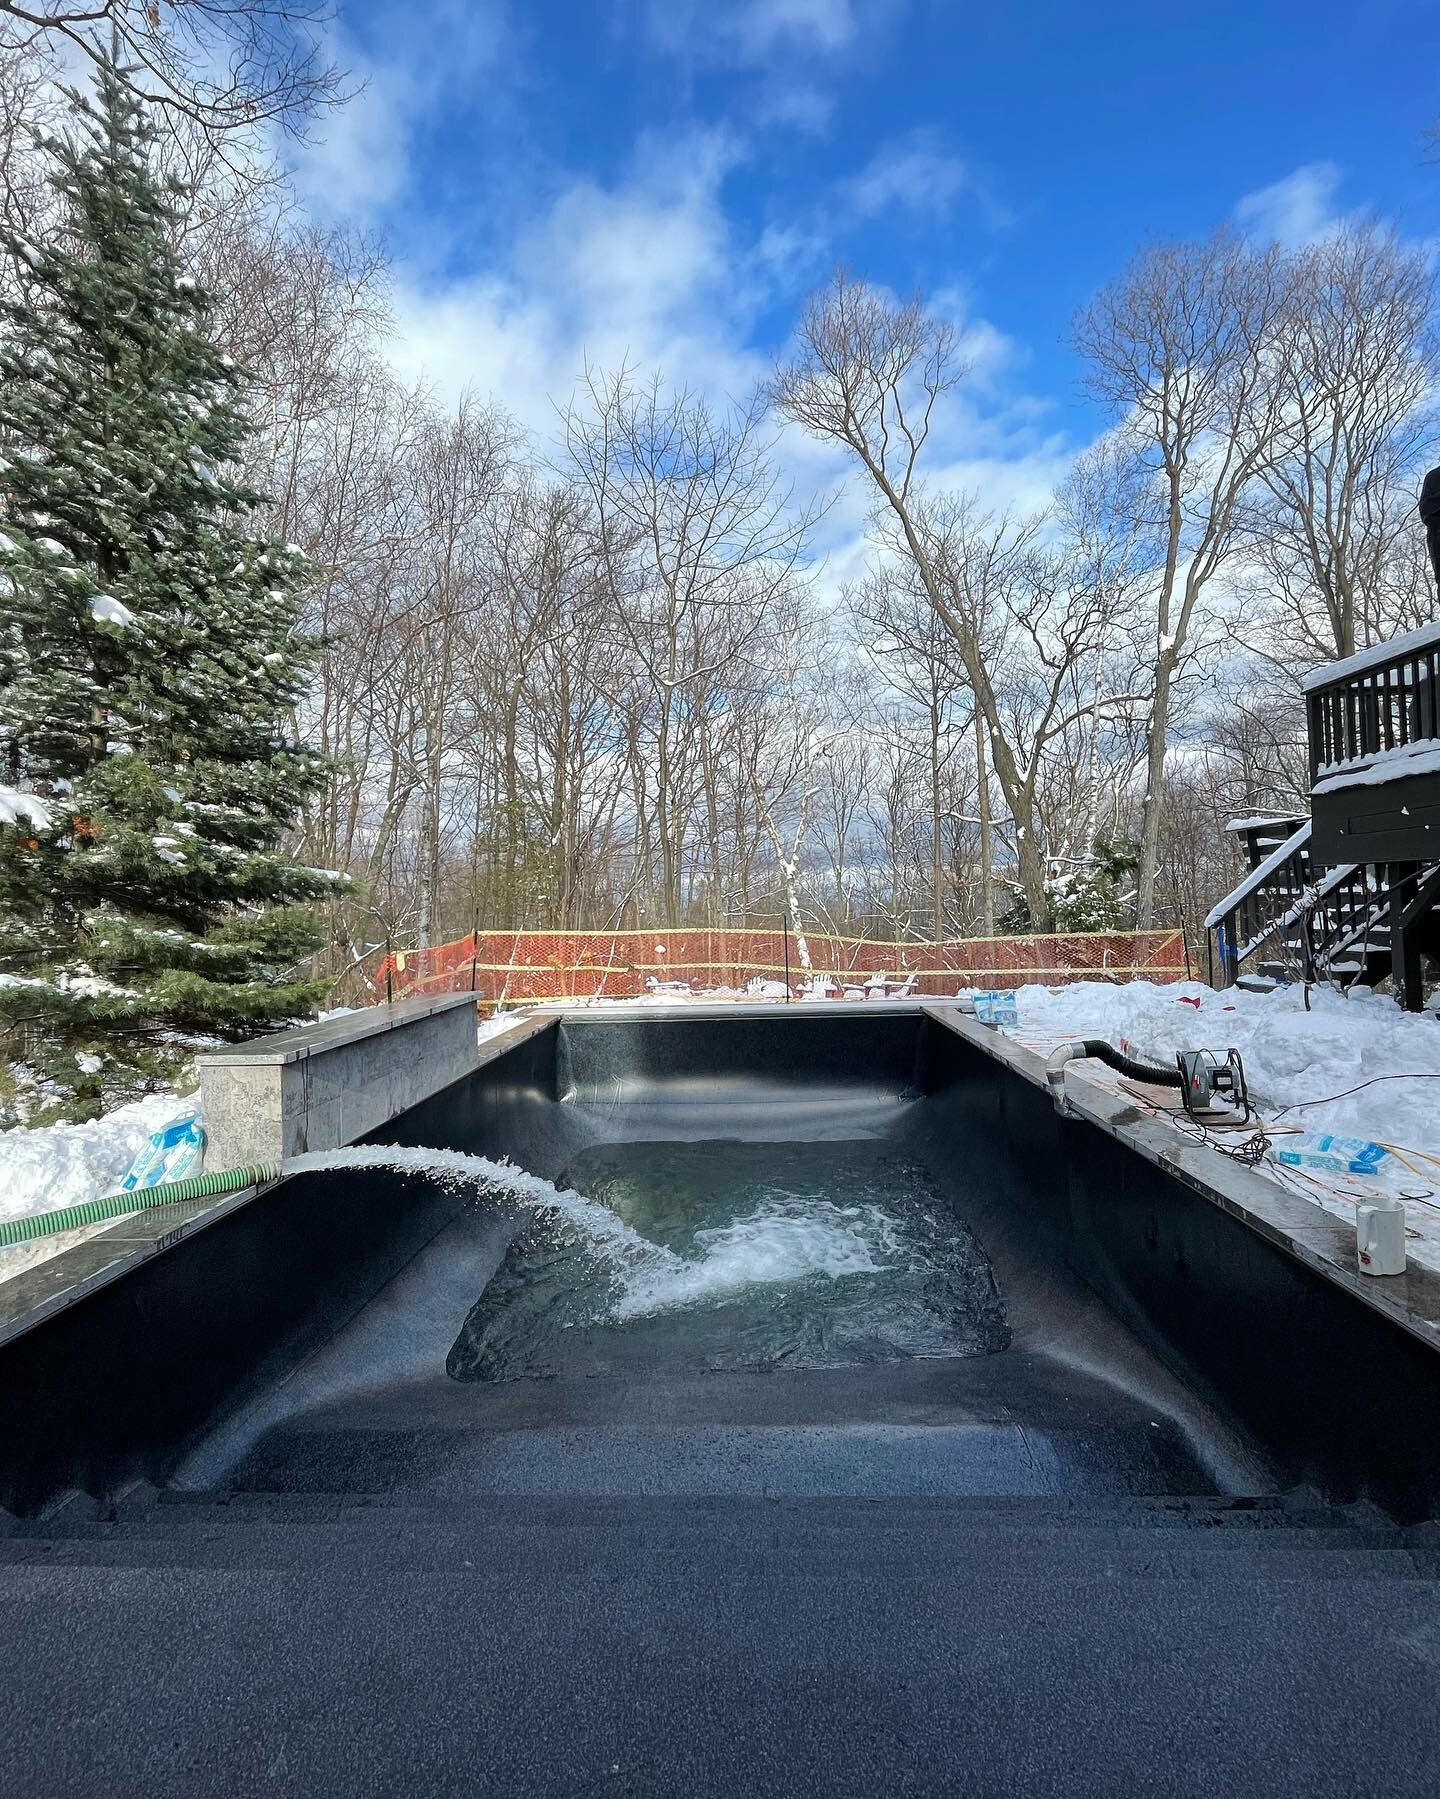 Renovation&hellip; weekend 🔨 
And the pool build continues in the midst of our crazy snowfall. Is this normal?! Maybe not, but it sure is fun 🥳

#renovation #reimagined #countrymodern #chalet #yearroundpool #design #georgianbaylife #fourseasonslife